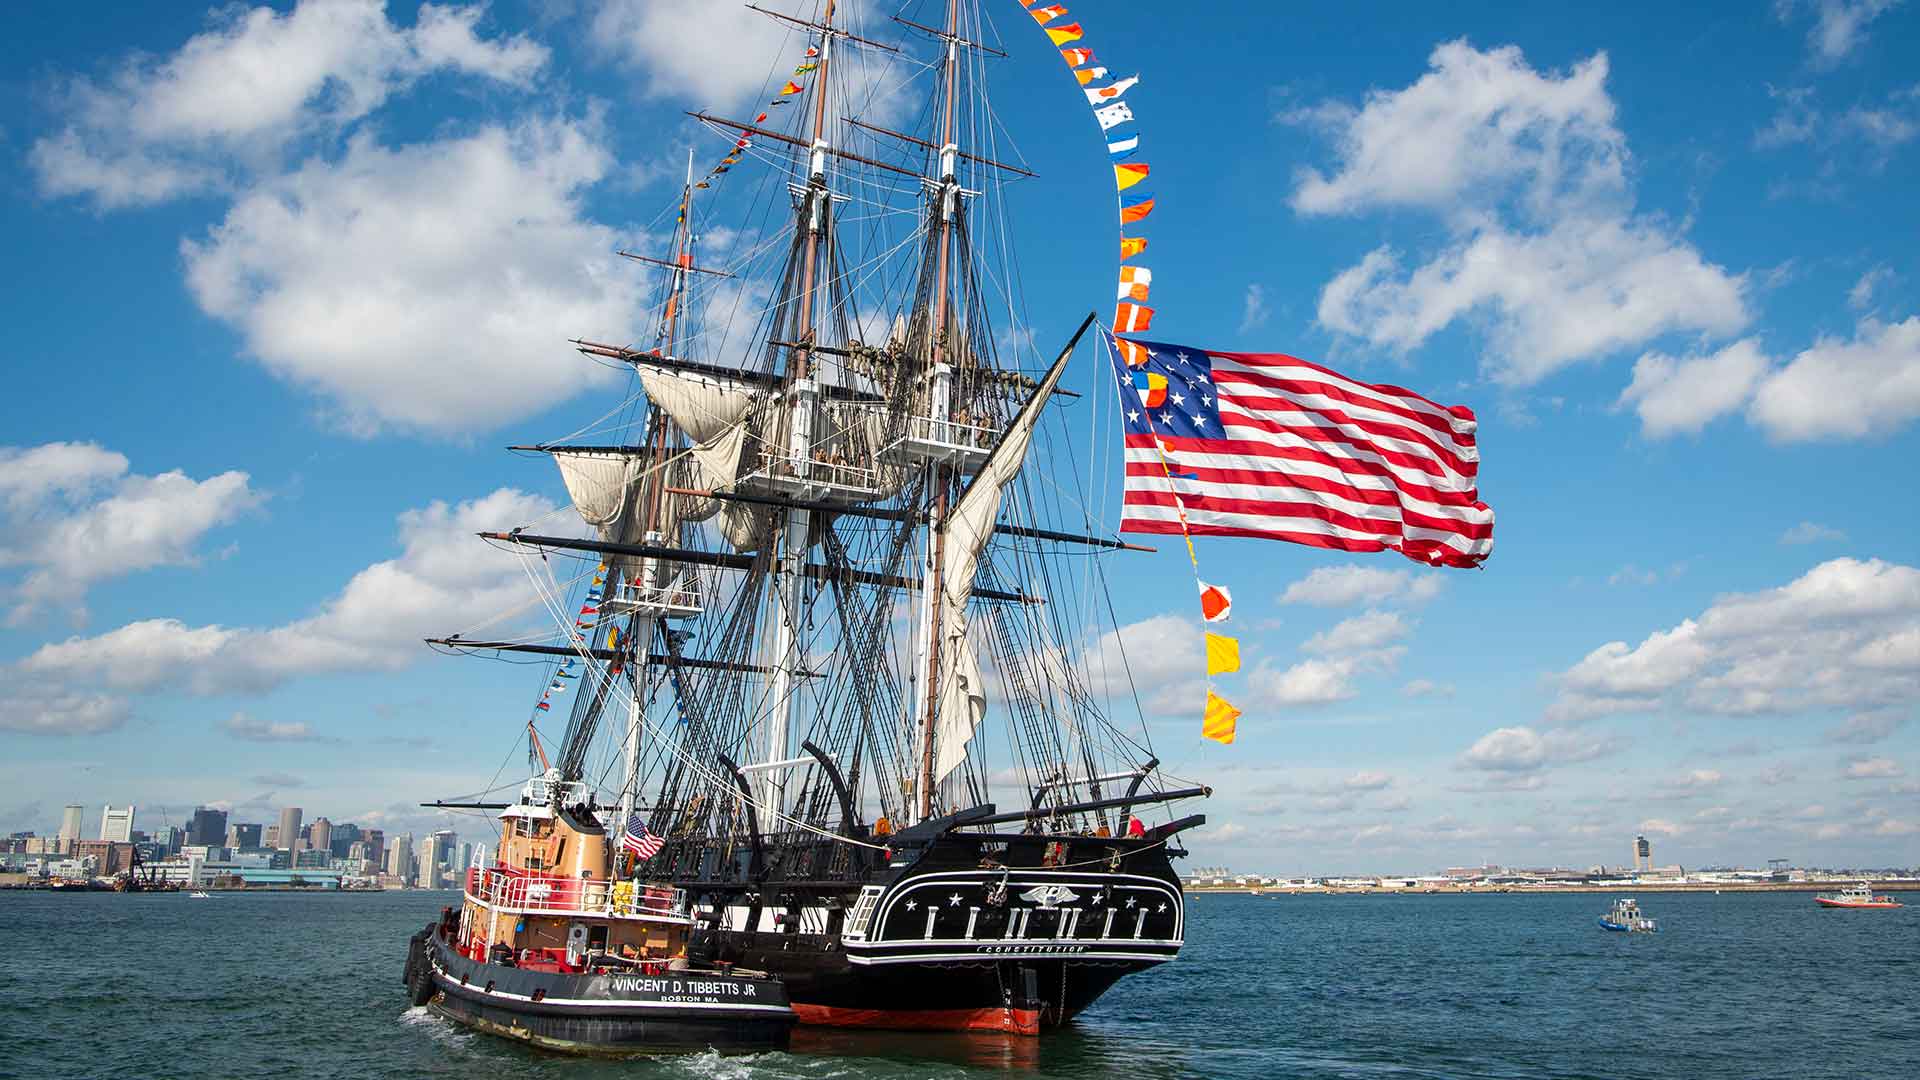 The USS Constitution, the U.S. Navy's oldest commissioned warship sails during a heritage event. 